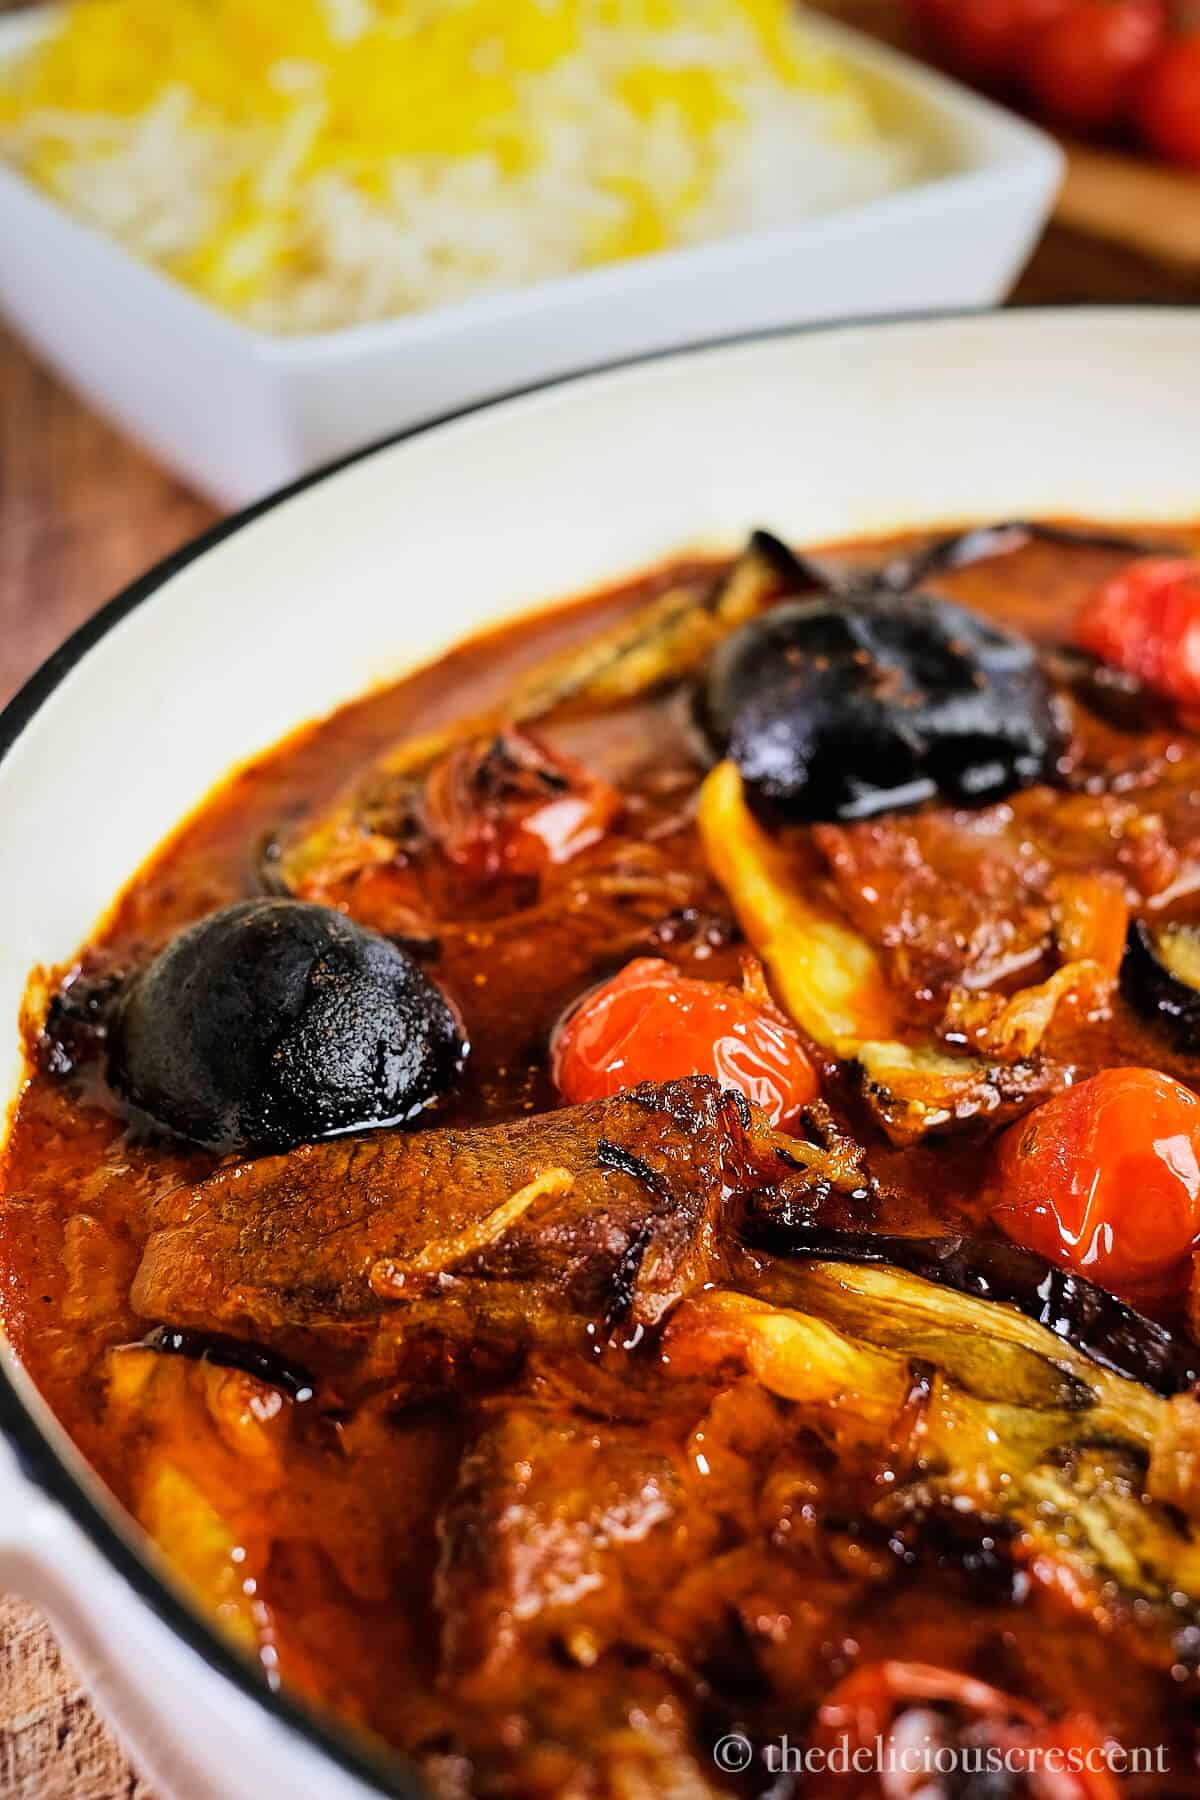 Eggplant stew cooked in Persian style and served on table.